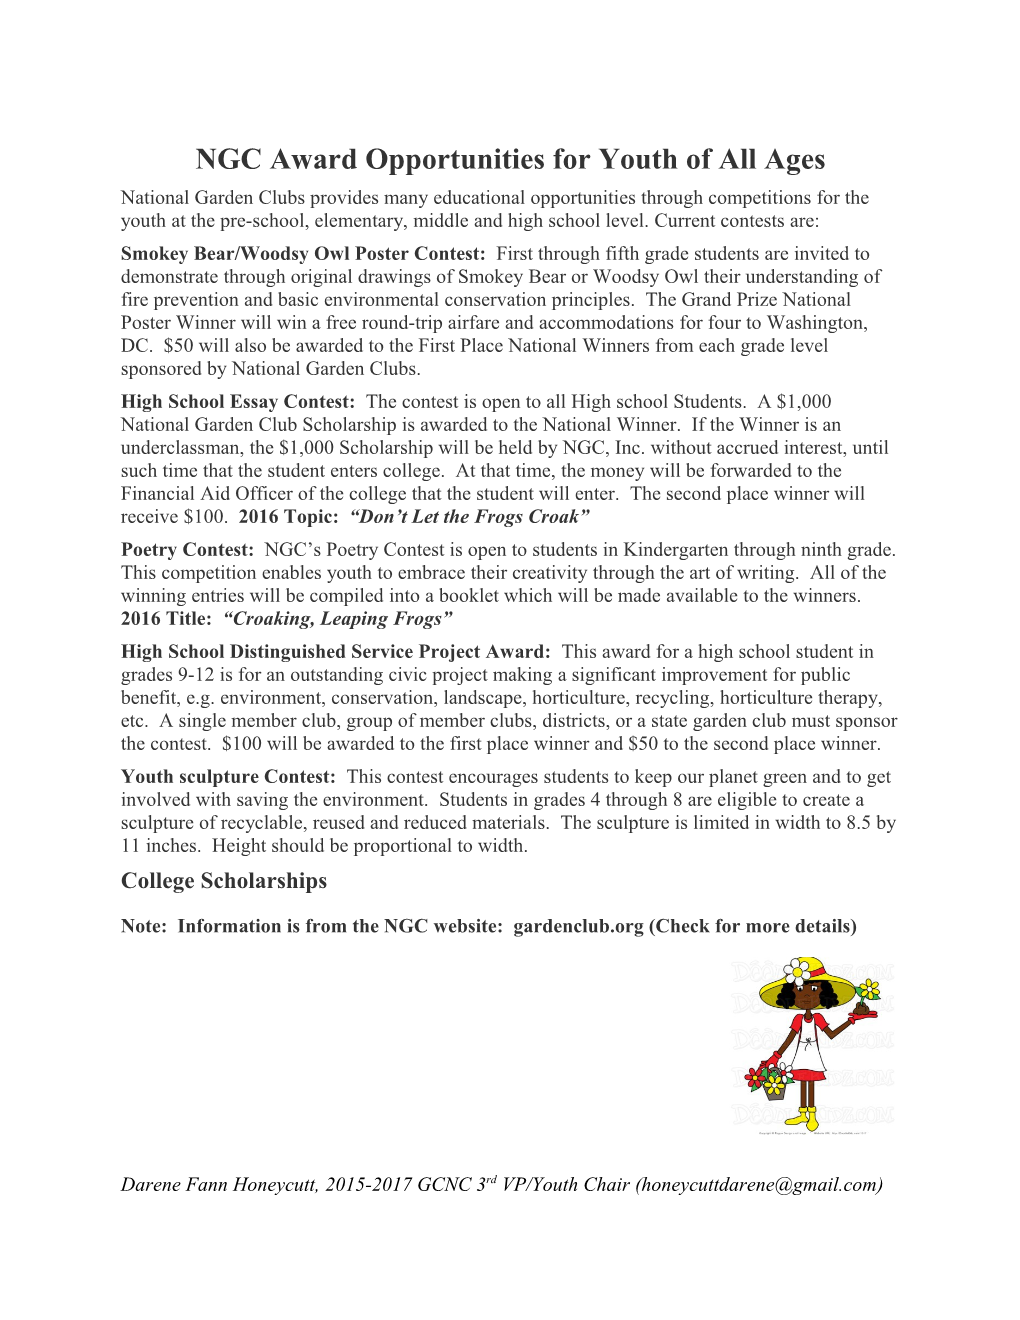 NGC Award Opportunities for Youth of All Ages